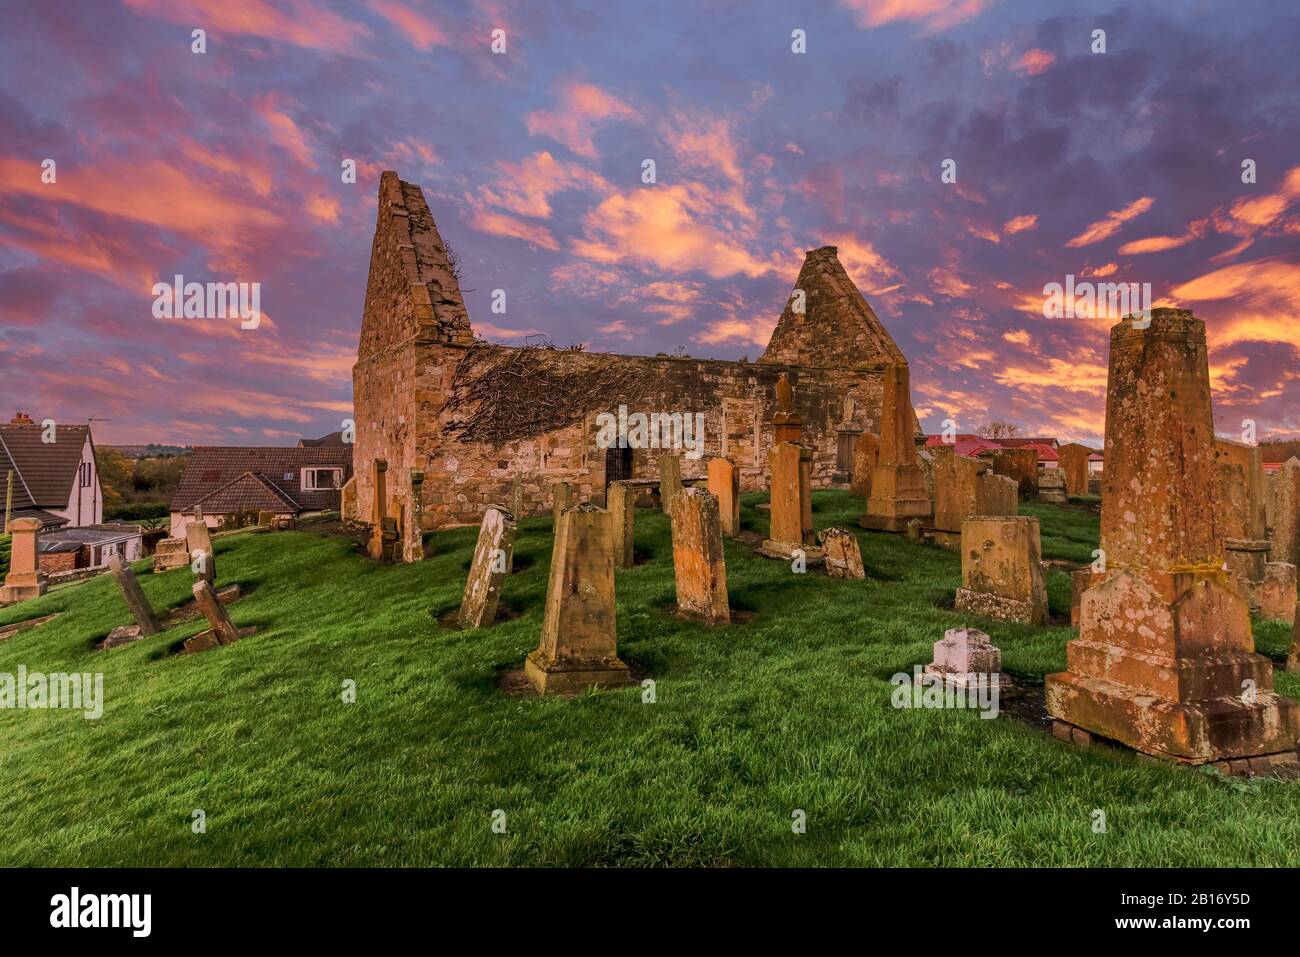 The Old Ruins of Prestwick Old Parish Church & Graveyard. Dedicated to St Nicholas Thought to date from the 12th Century and taken at the end of the d Stock Photo